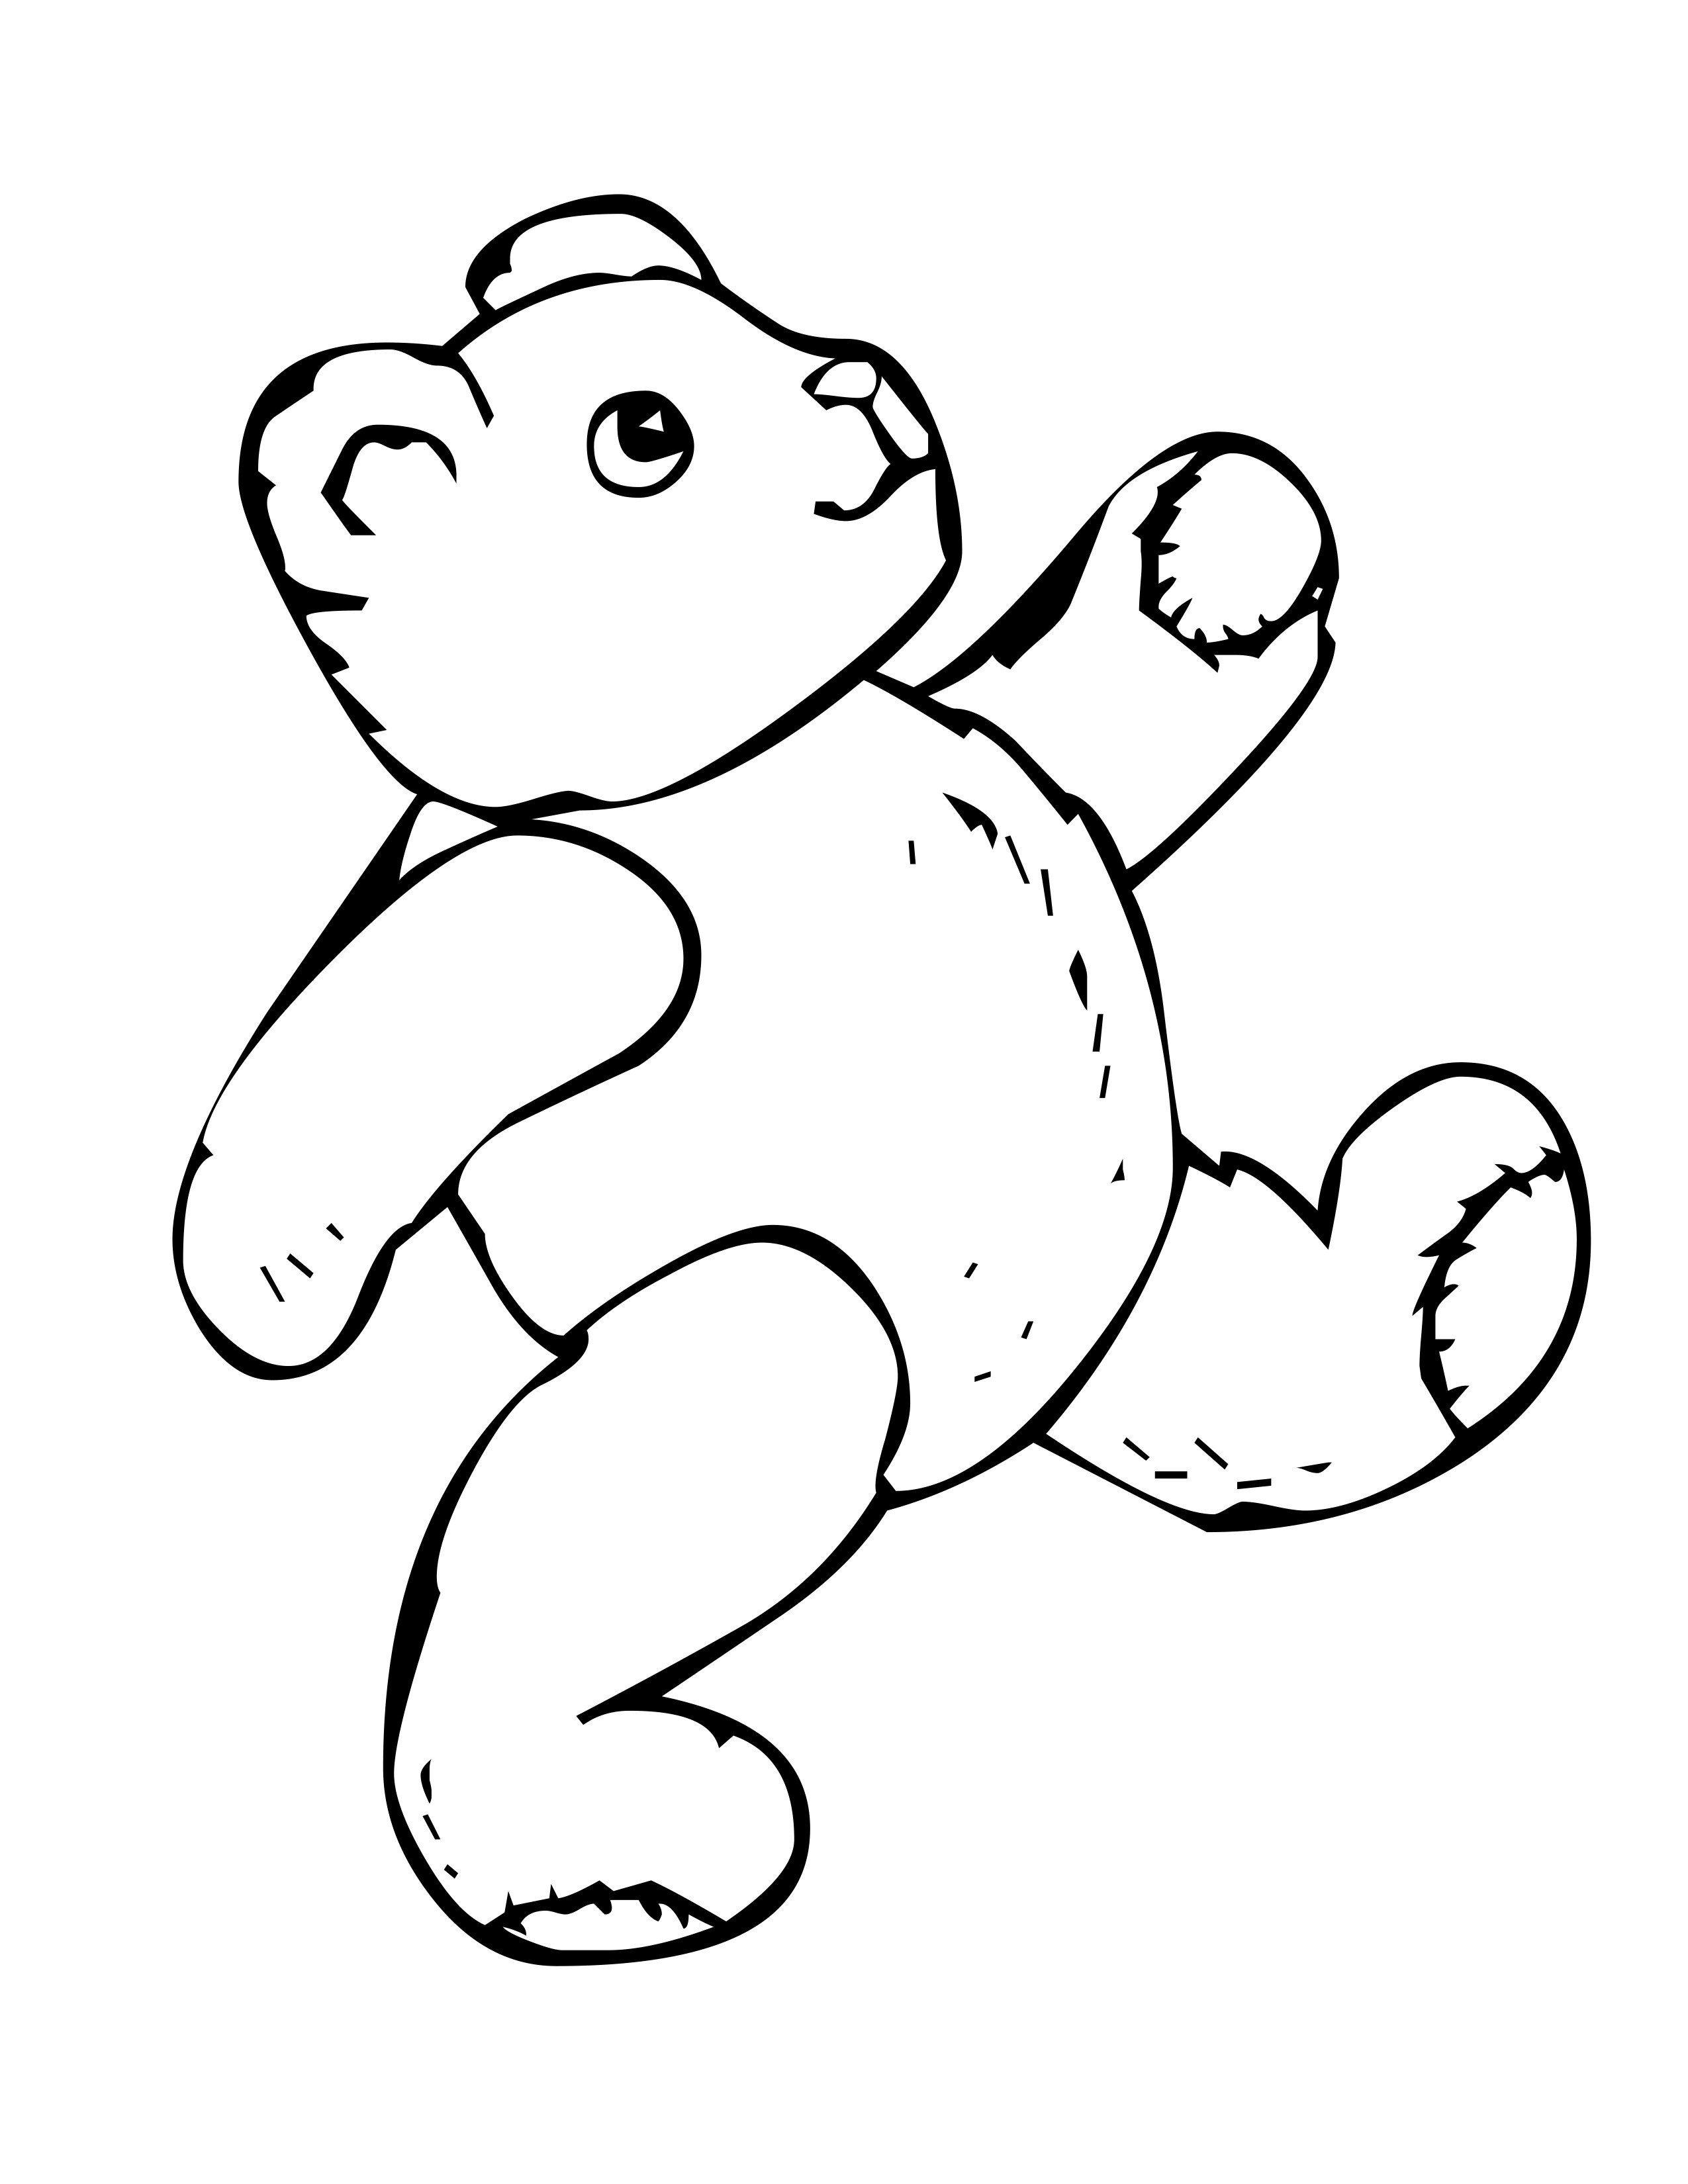 Awesome Bear Coloring Page About Teddy Bear Coloring Pages on with ...